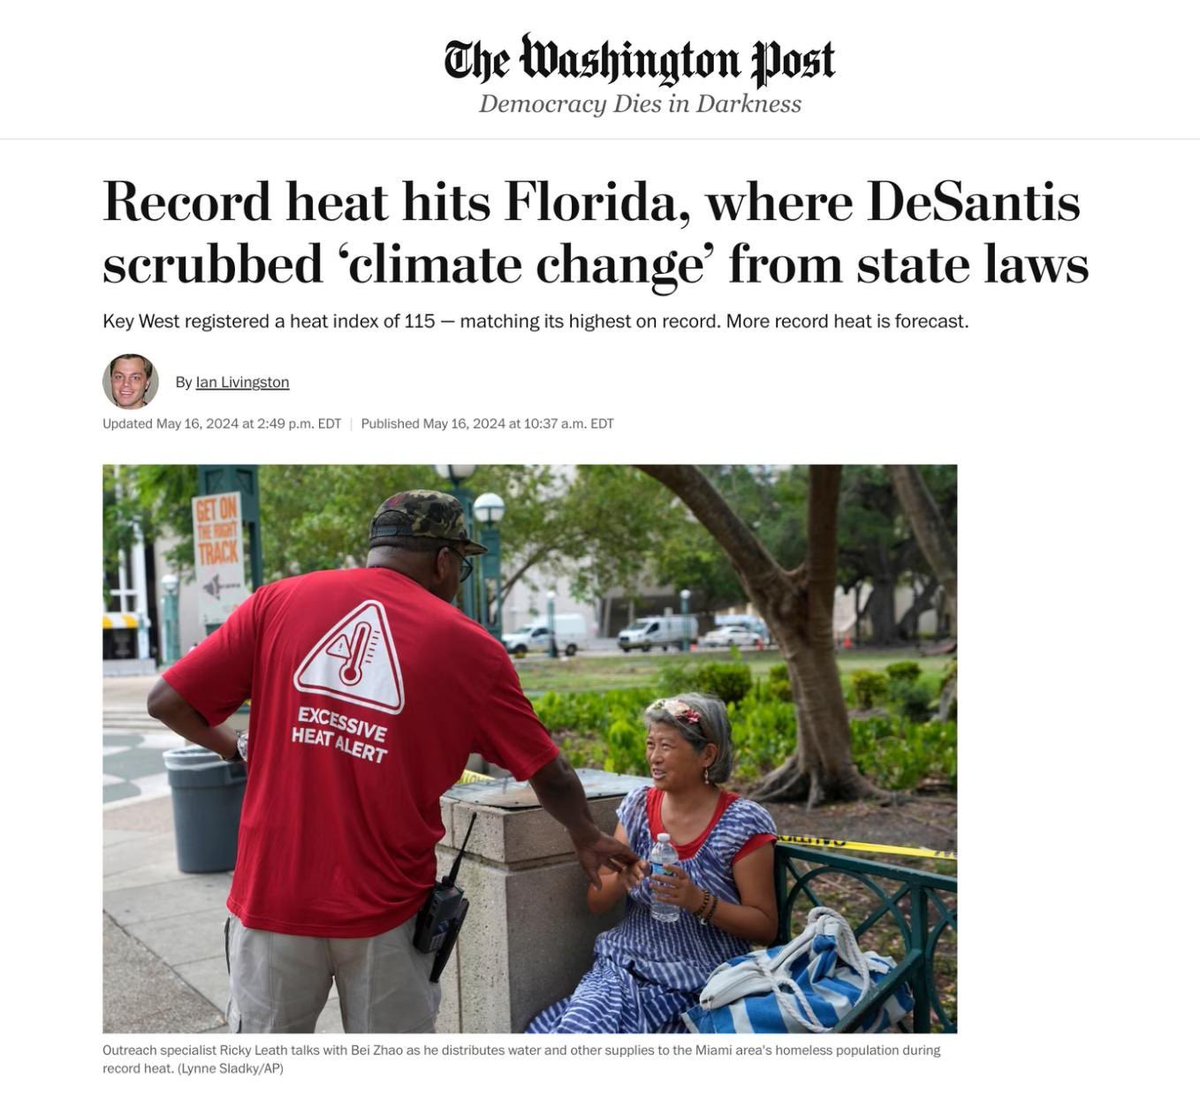 As the National Weather Service issues warnings for dangerous heat temperatures in parts of Florida, Ron DeSantis signs a bill that eliminates climate change from Florida policy. Because…priorities